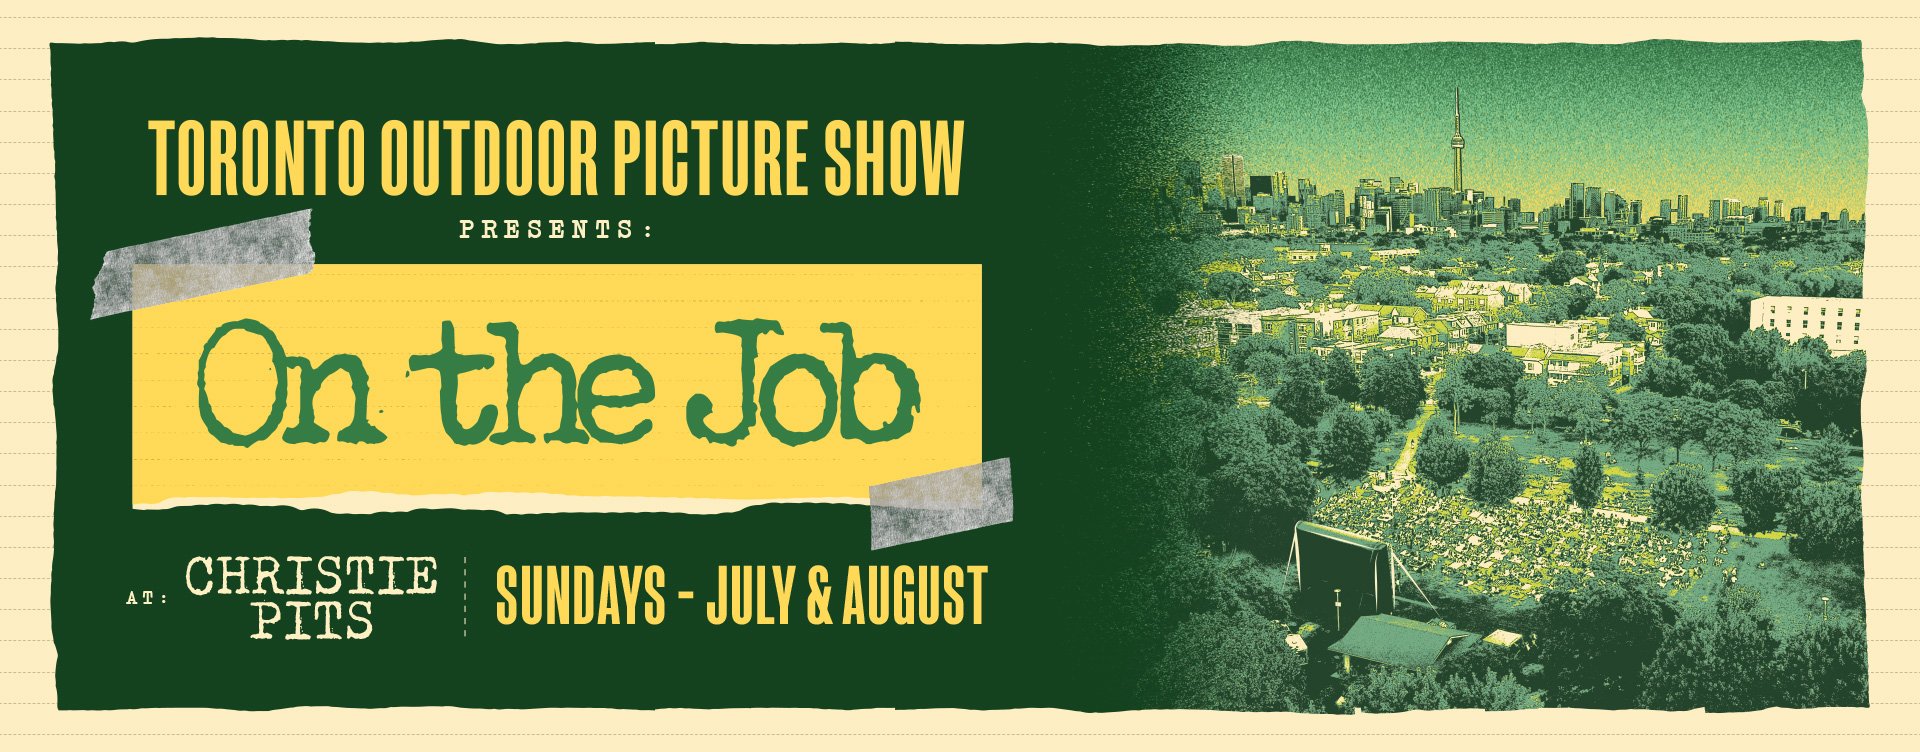 TOPS presents "On the Job" at Christie Pits - Sundays in July &amp; August